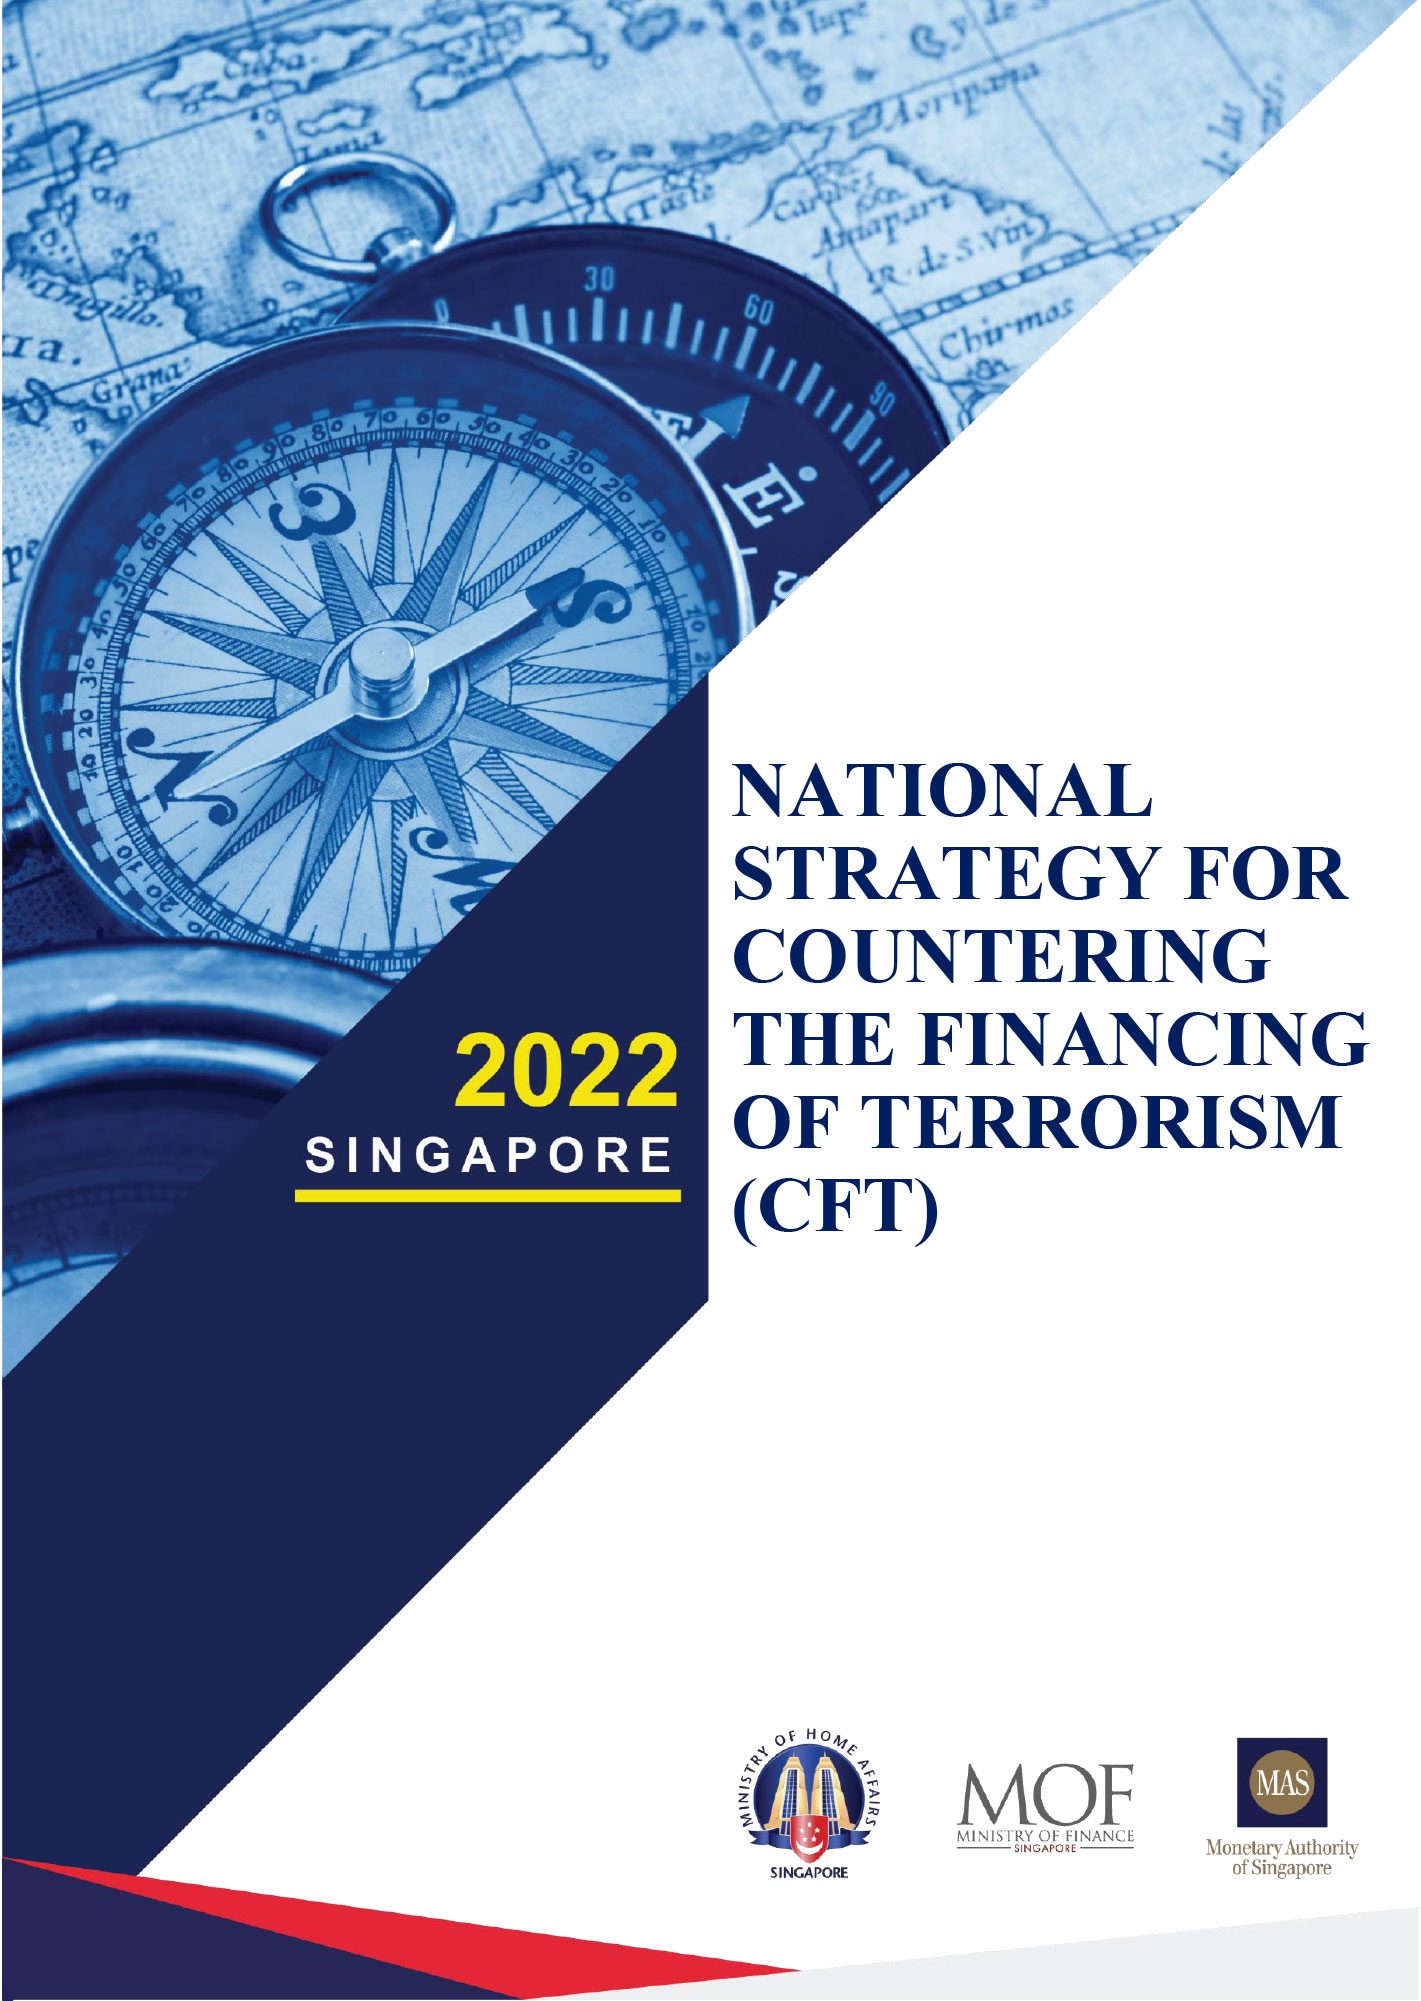 National Strategy for Countering the Financing of Terrorism